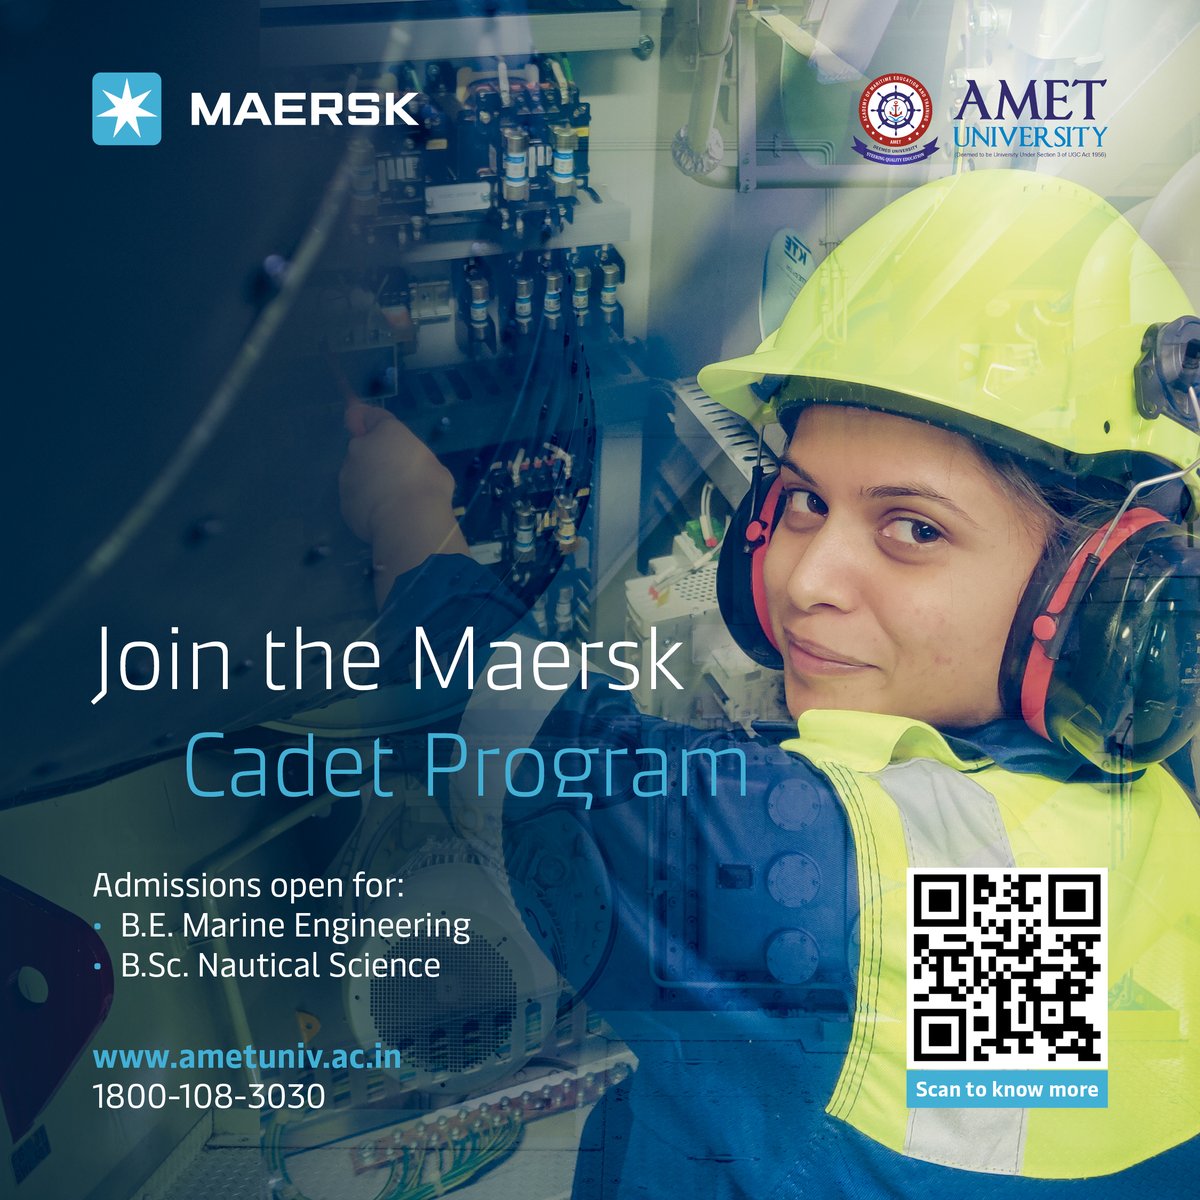 Navigate a successful future with Maersk's Cadetship Program.

Admissions are now open!

#ametinternational #ametuniversity #ametist #maersk